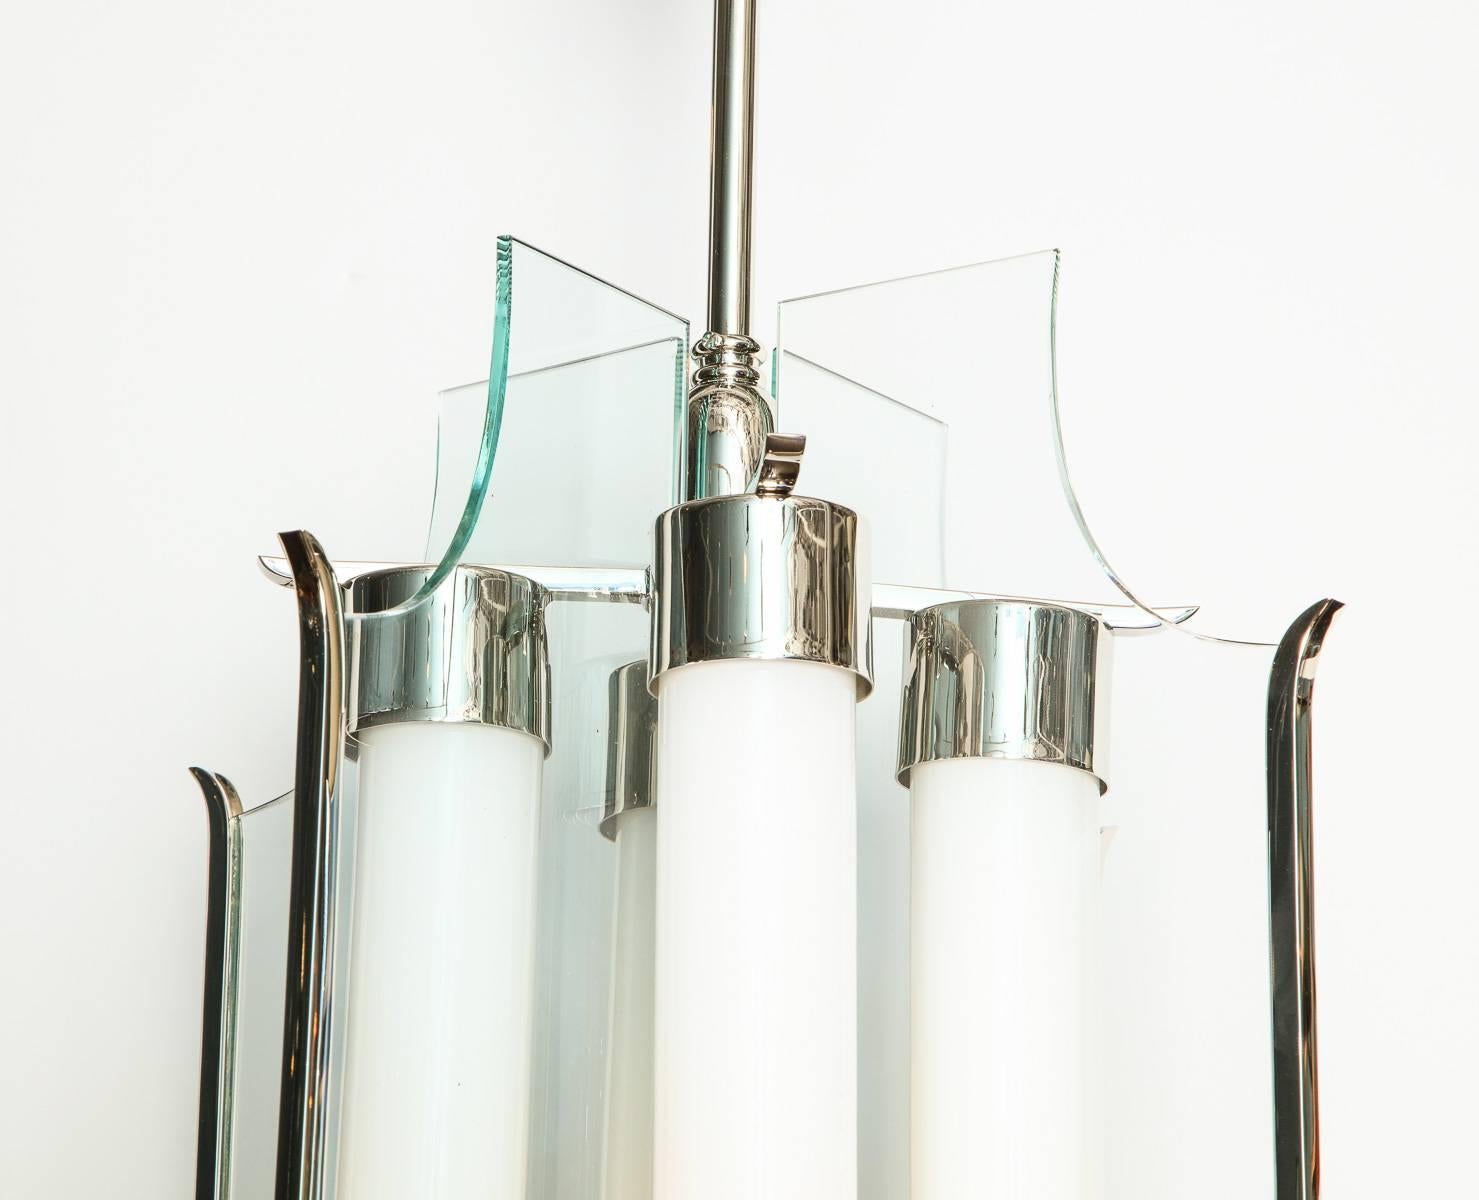 Early and rare hanging light by Pietro Chiesa studio. Elegant fixture of nickelled metal with beautifully machined elements. Clear glass panels and opaque glass tubes. Each tube conceals one standard Edison socket. This fixture comes with a letter